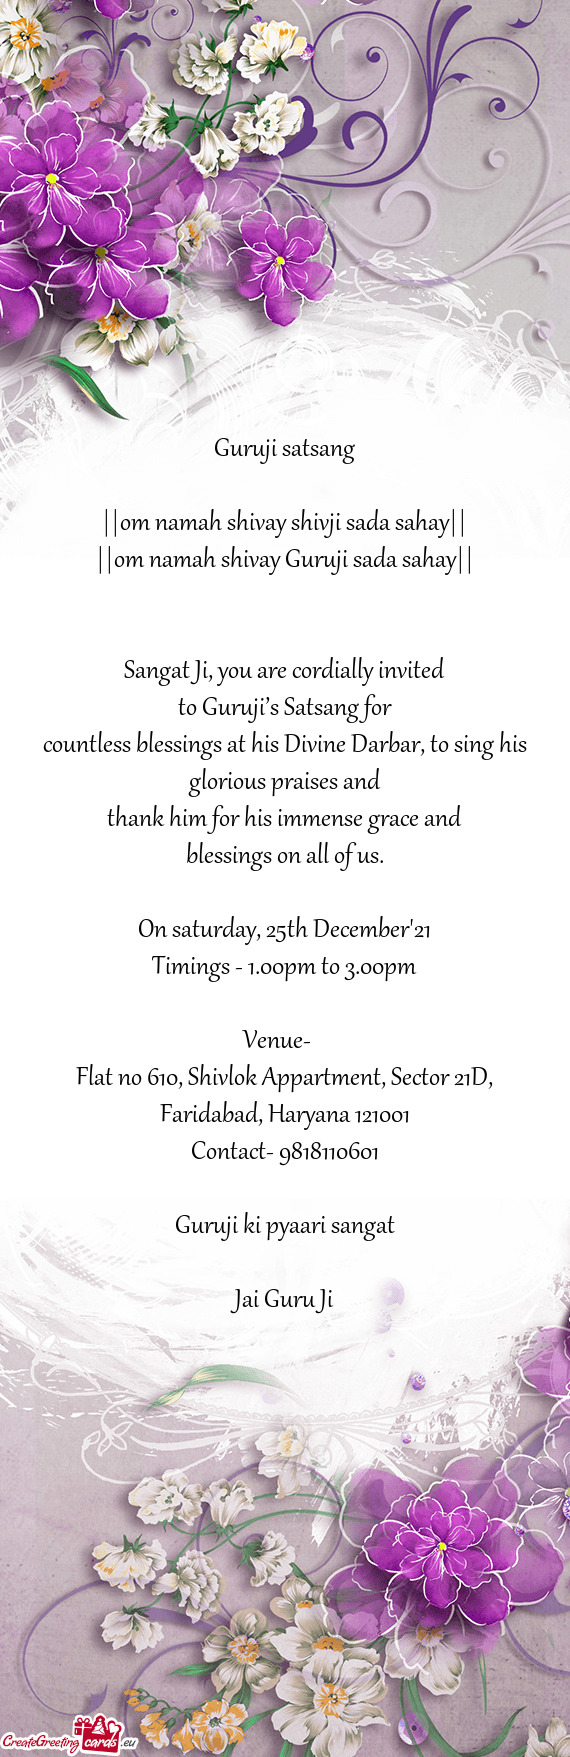 Countless blessings at his Divine Darbar, to sing his glorious praises and